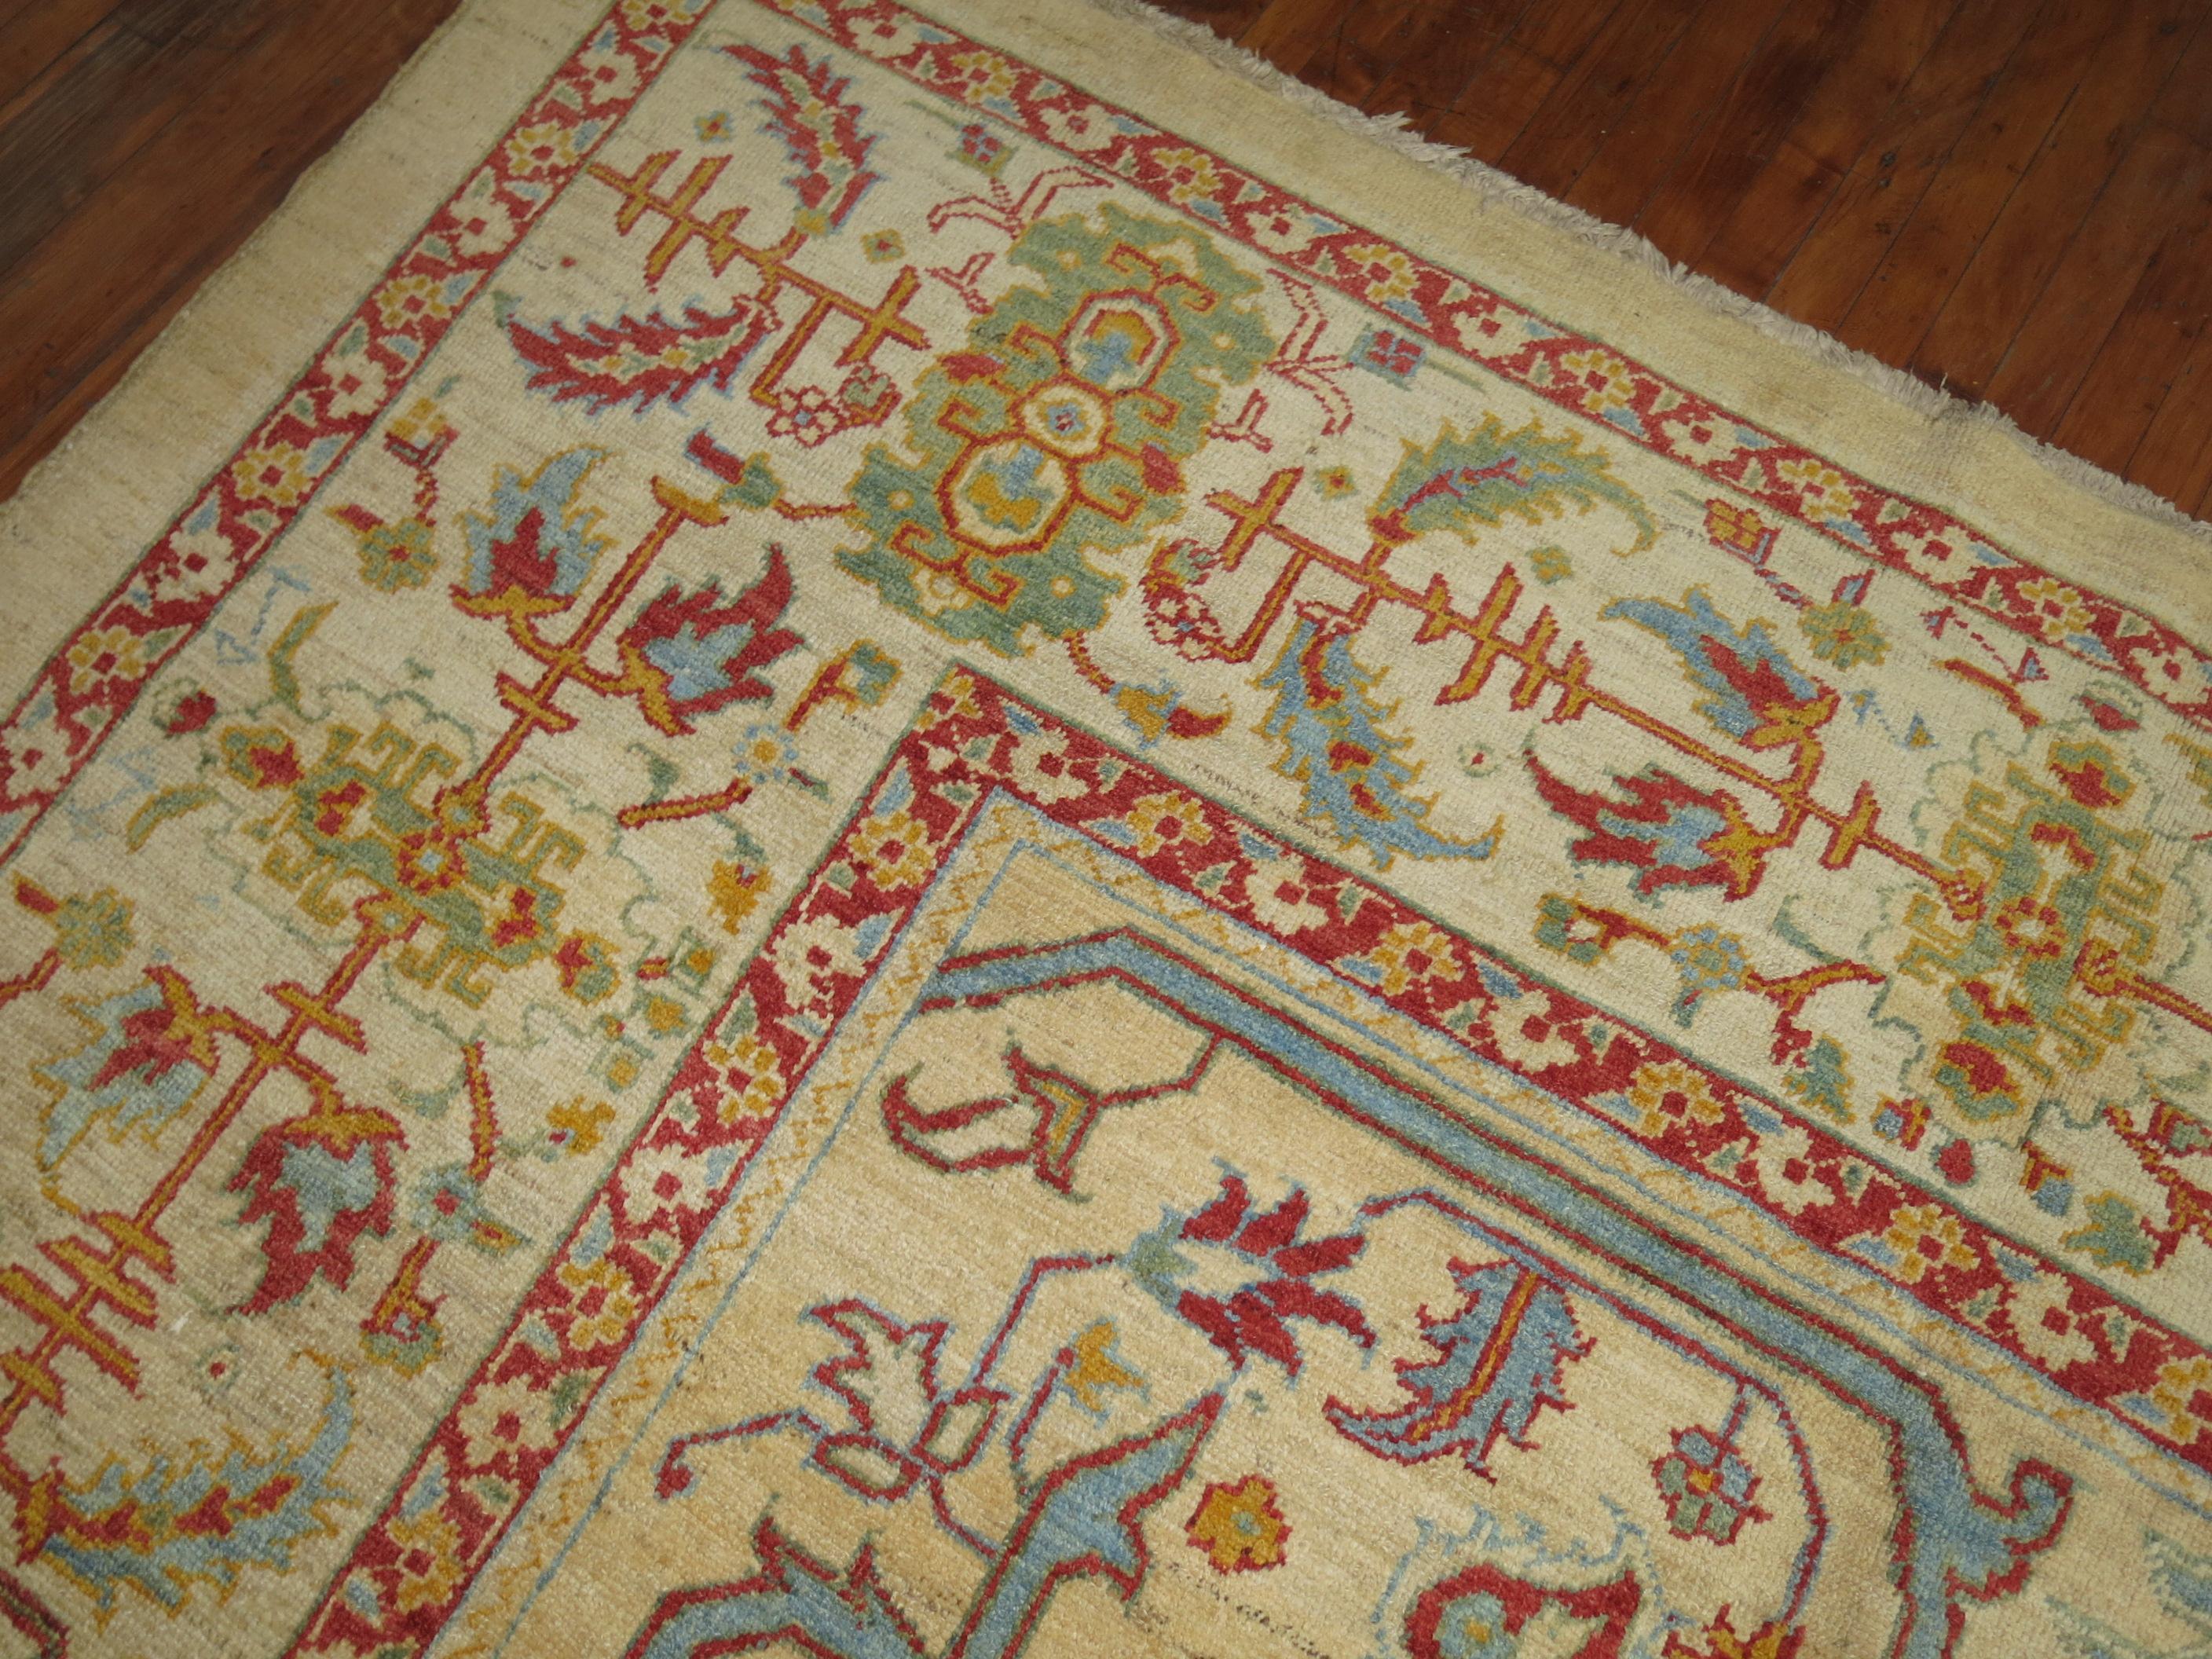 A highly unusual decorative large vintage Persian rug which was woven to replicate an old Turkish Oushak. The enriched colors in the piece include a camel field with strawberry reds, robin eggs blue, lime green, burnt orange and an ivory border. The